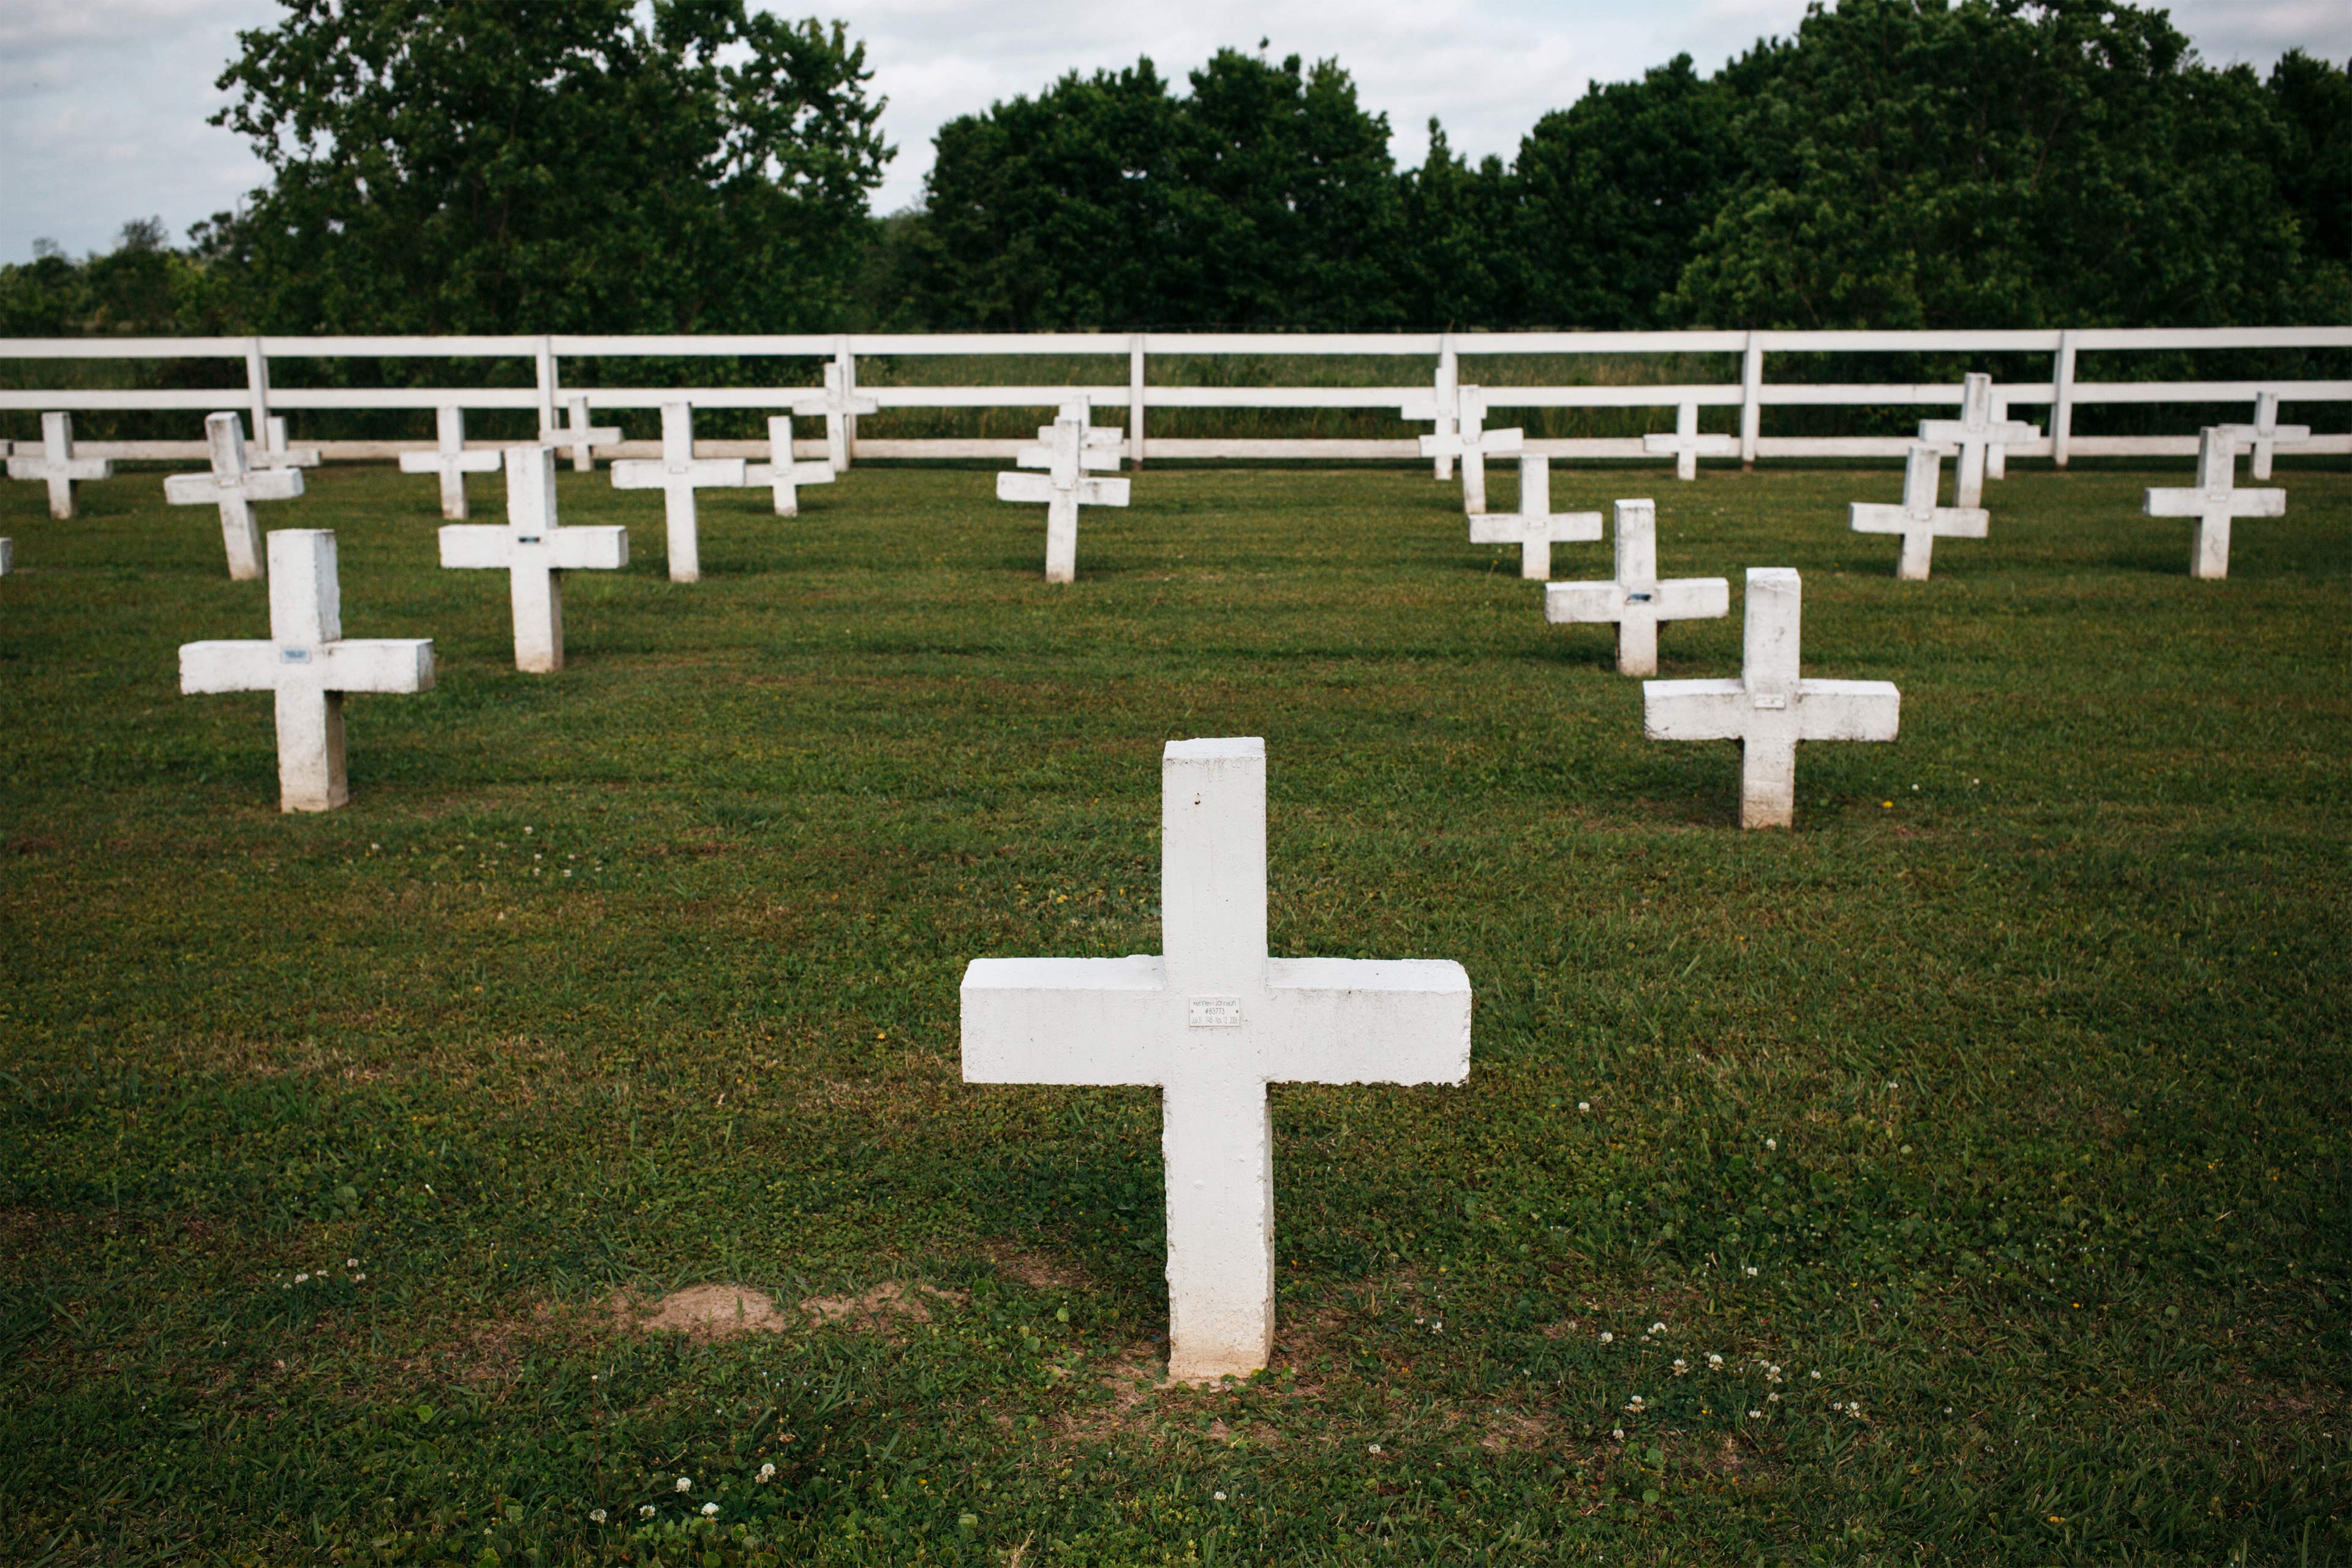 A photo of a cemetery grounds at a prison. Rows of white crosses are seen.